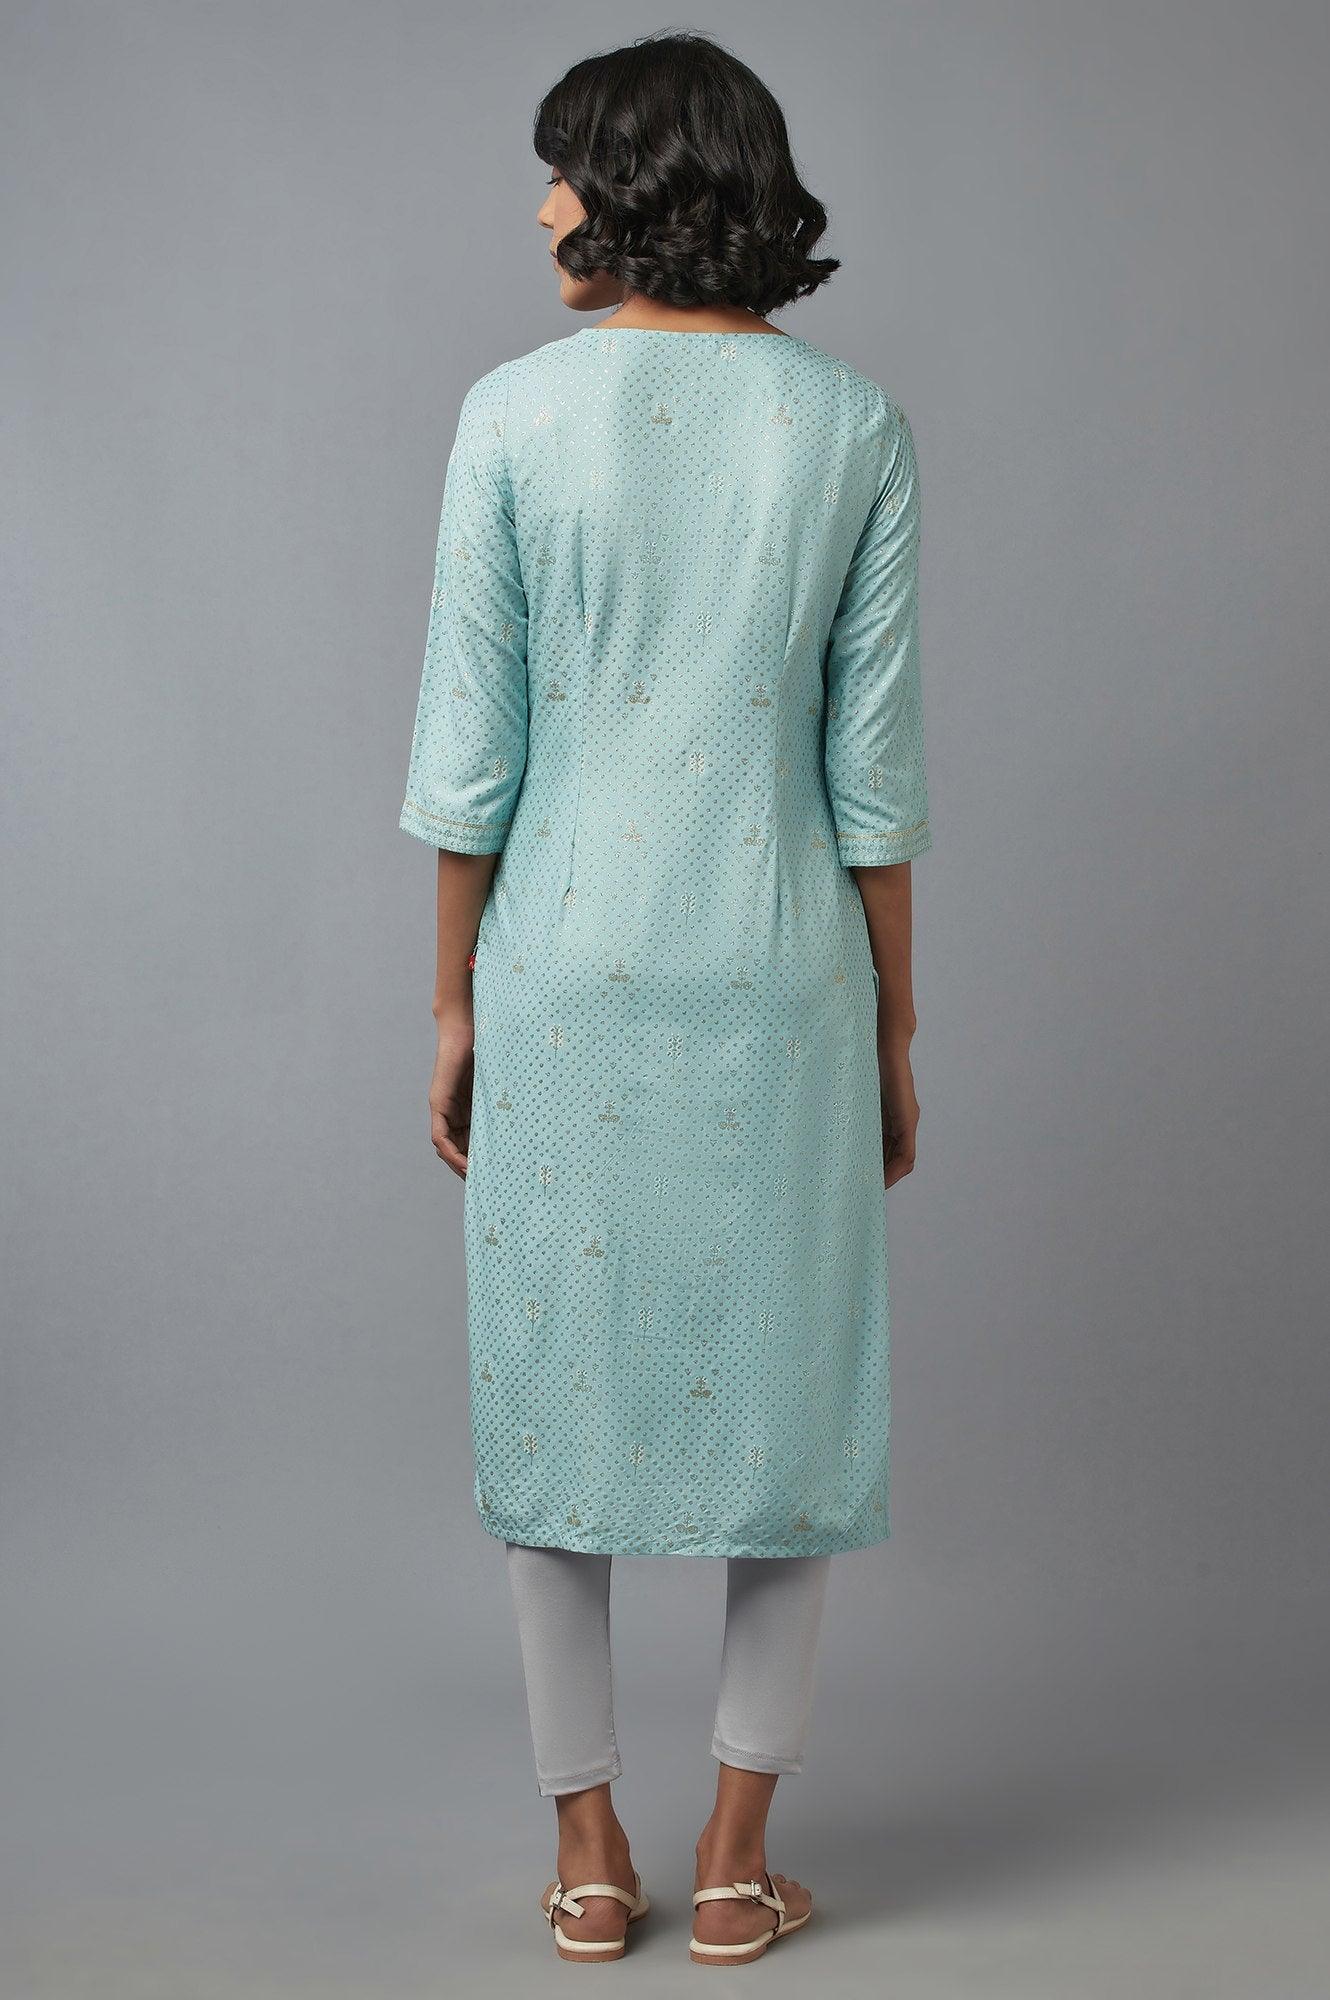 Light Blue Floral Print kurta in Round Neck with Dori Embroidery - wforwoman